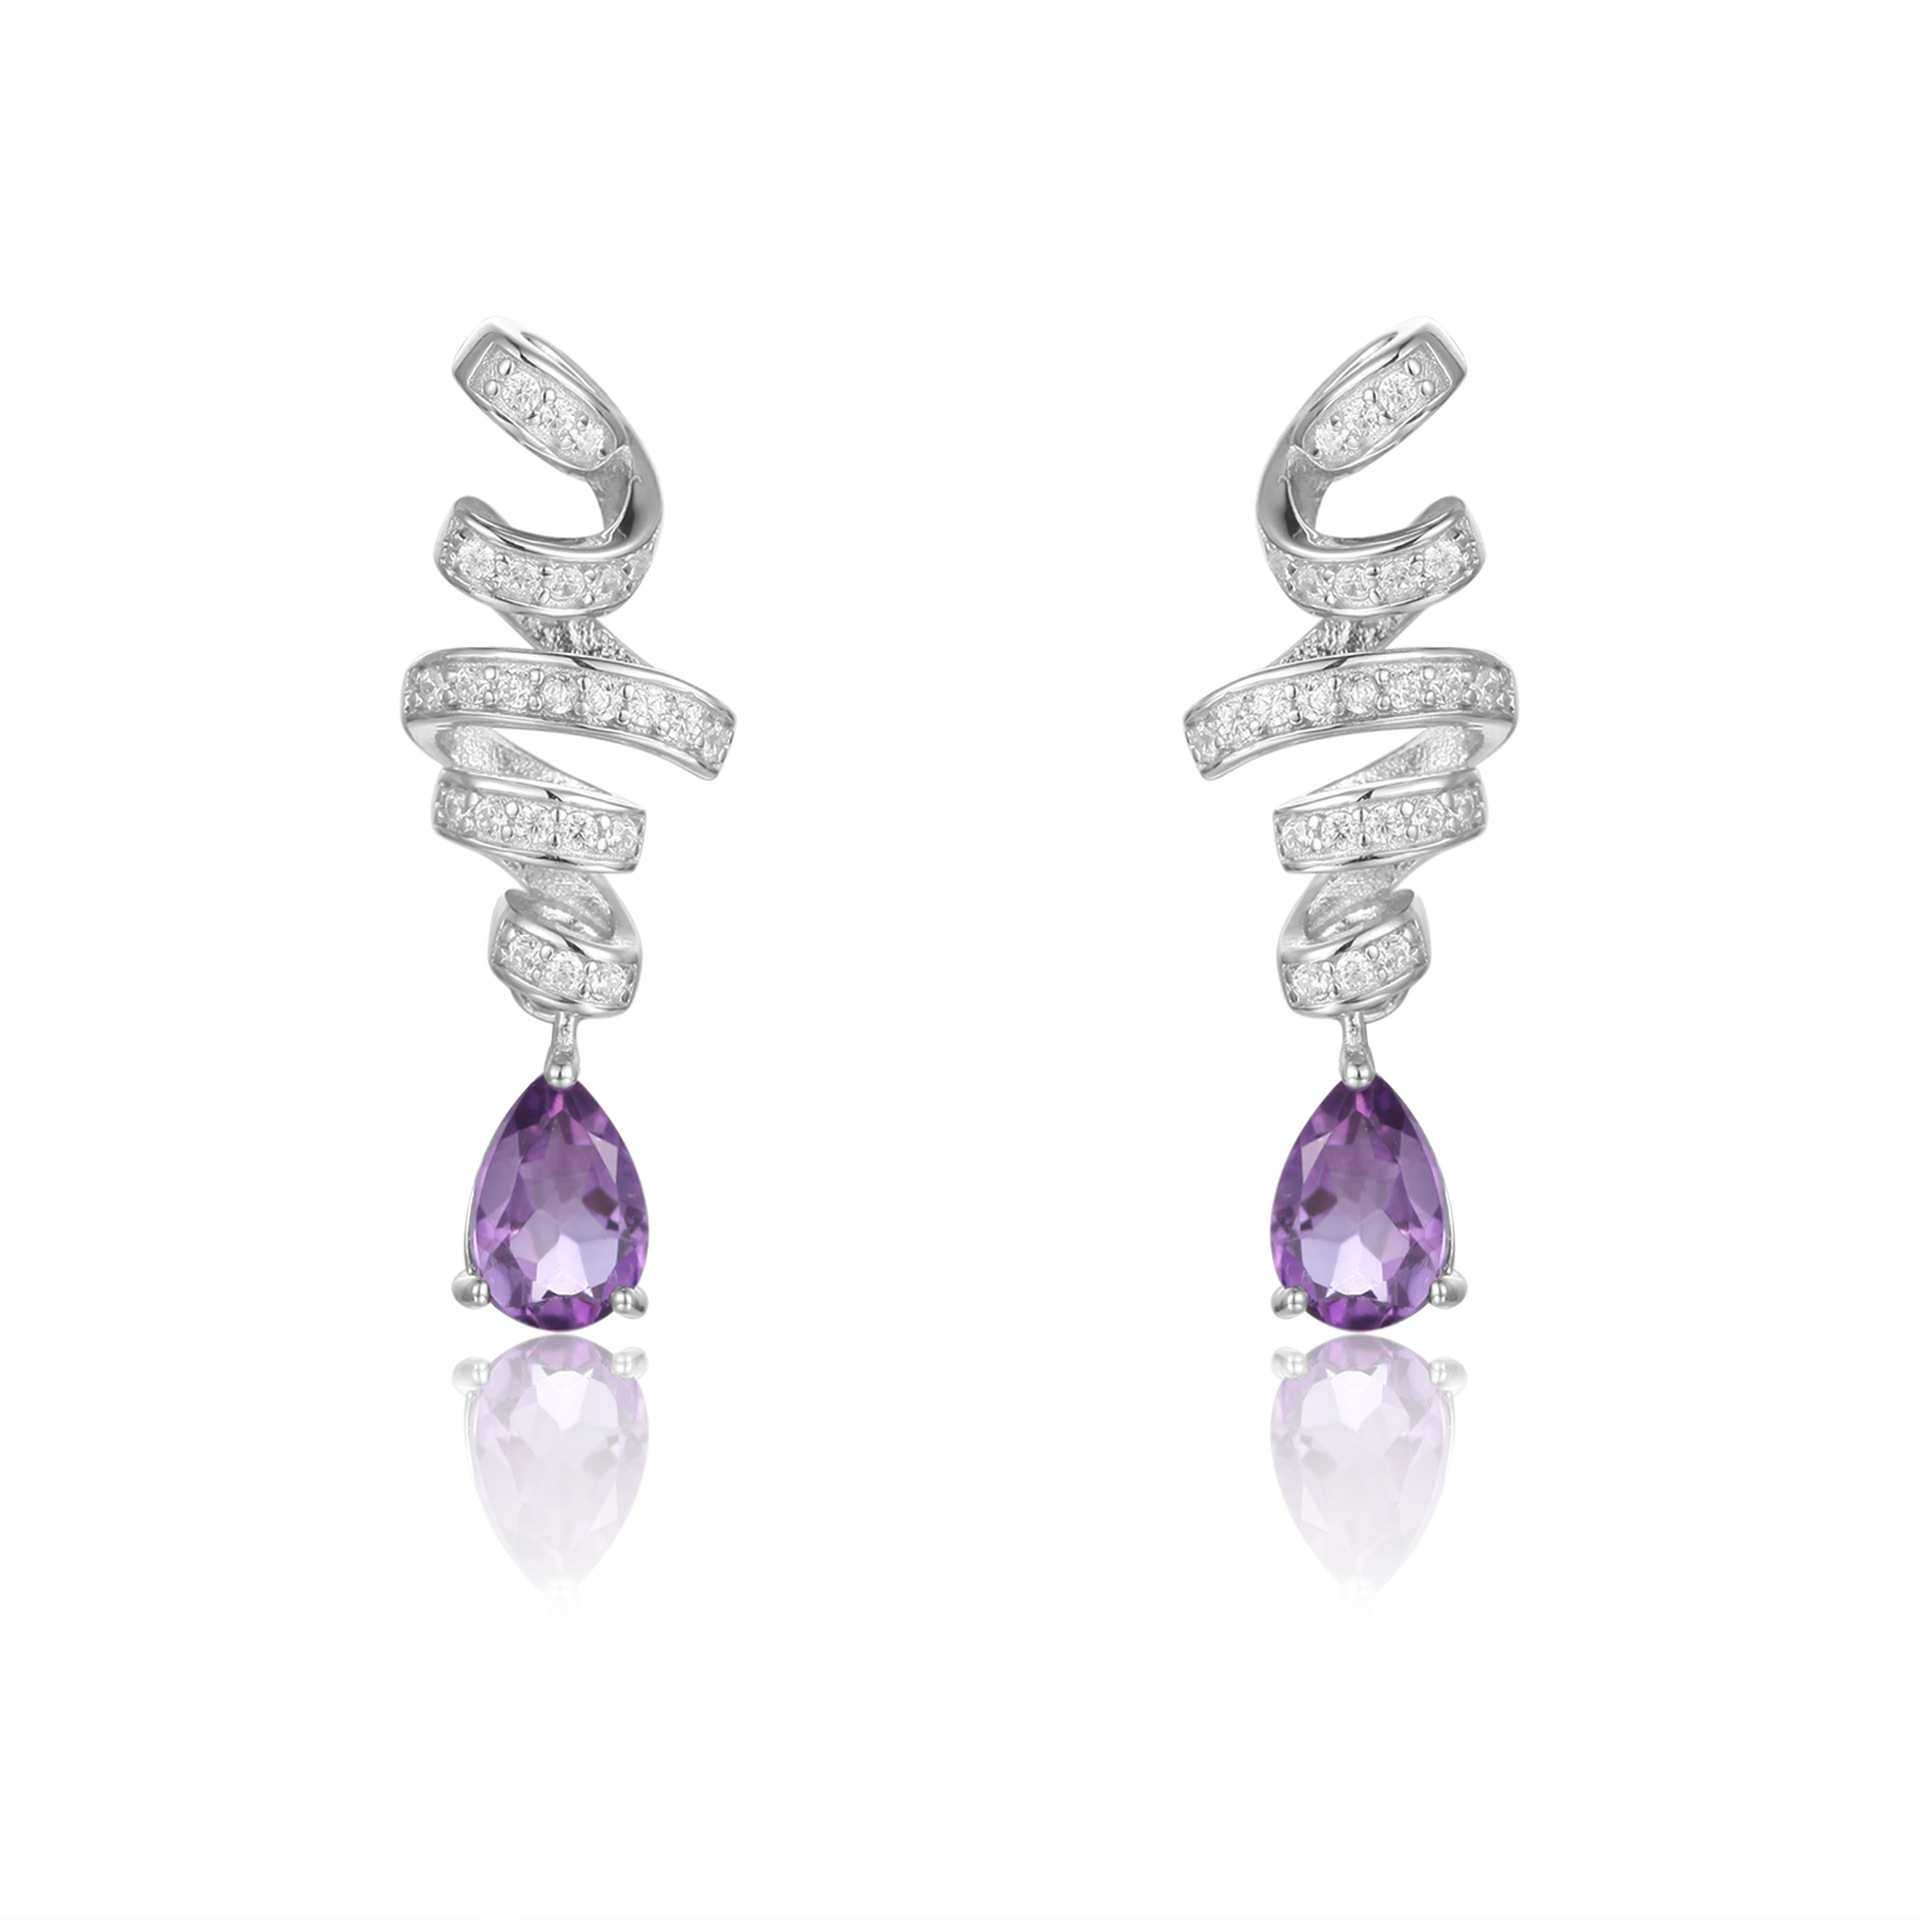 French Romantic S925 Silver Inlaid Natural Amethyst Earrings-BlingRunway